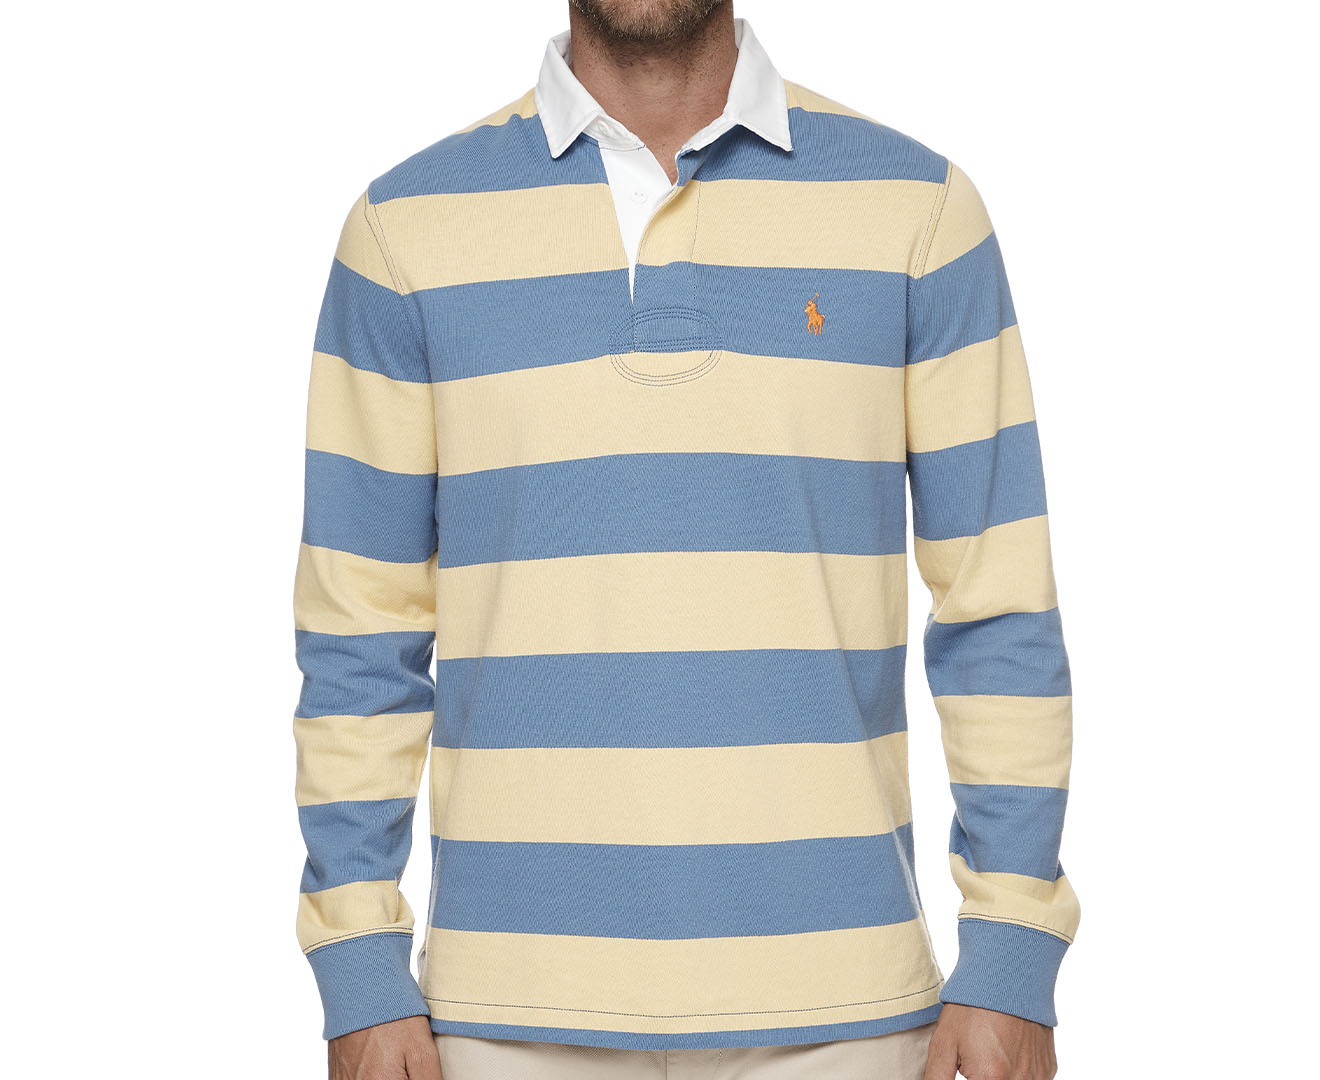 Polo Ralph Lauren Men's Long Sleeve Slim Fit Rugby Shirt - Blue  Campus/Yellow 